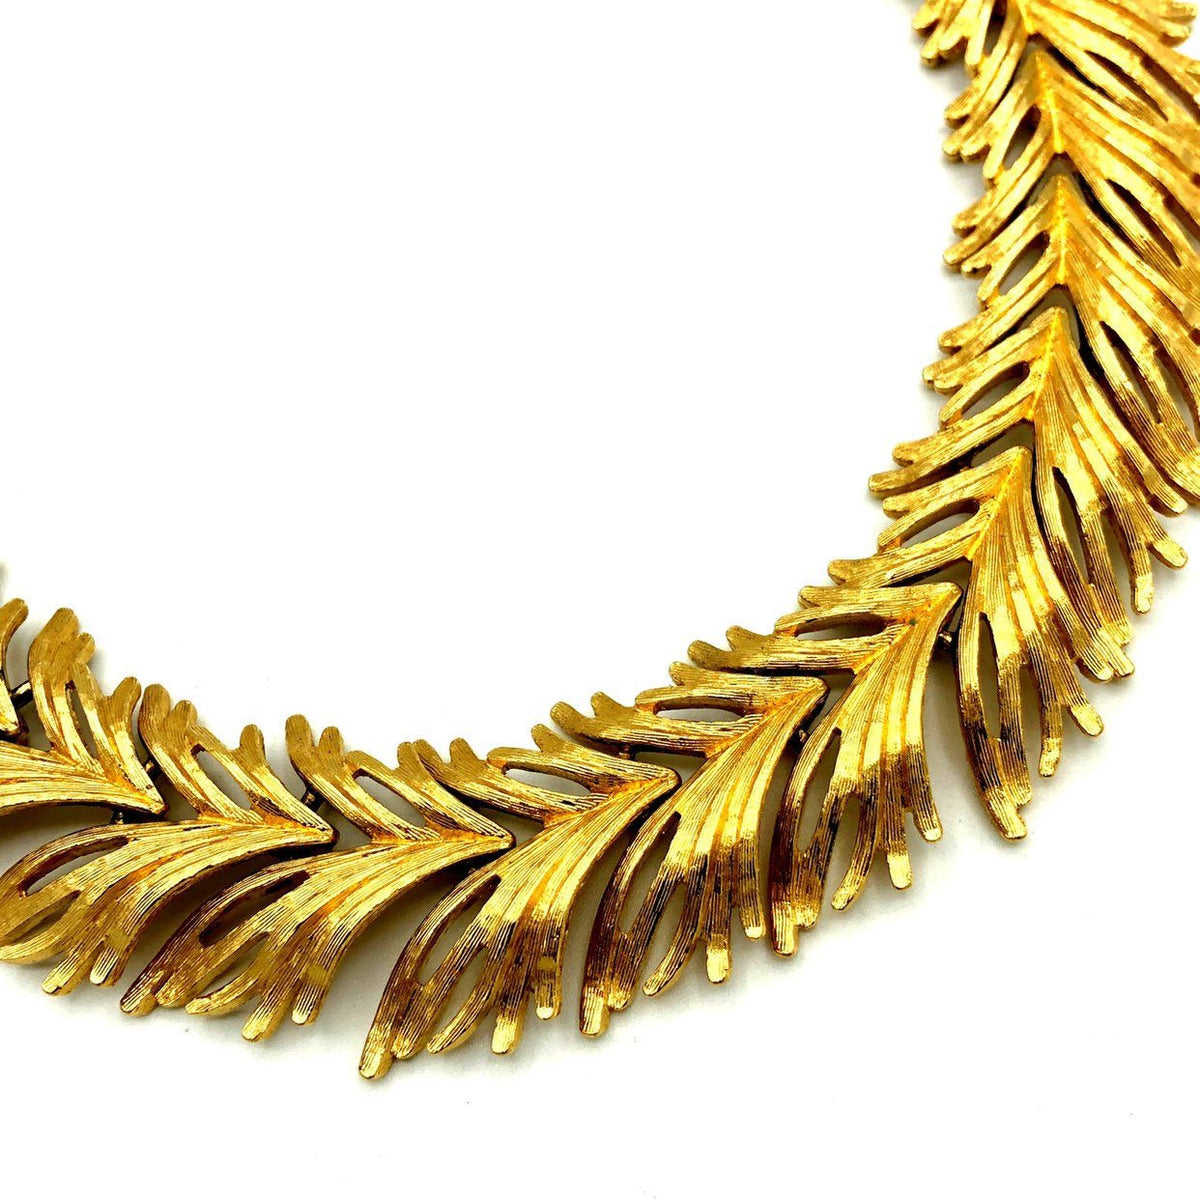 Classic Monet Gold Textured Leaf Vintage Necklace - 24 Wishes Vintage Jewelry